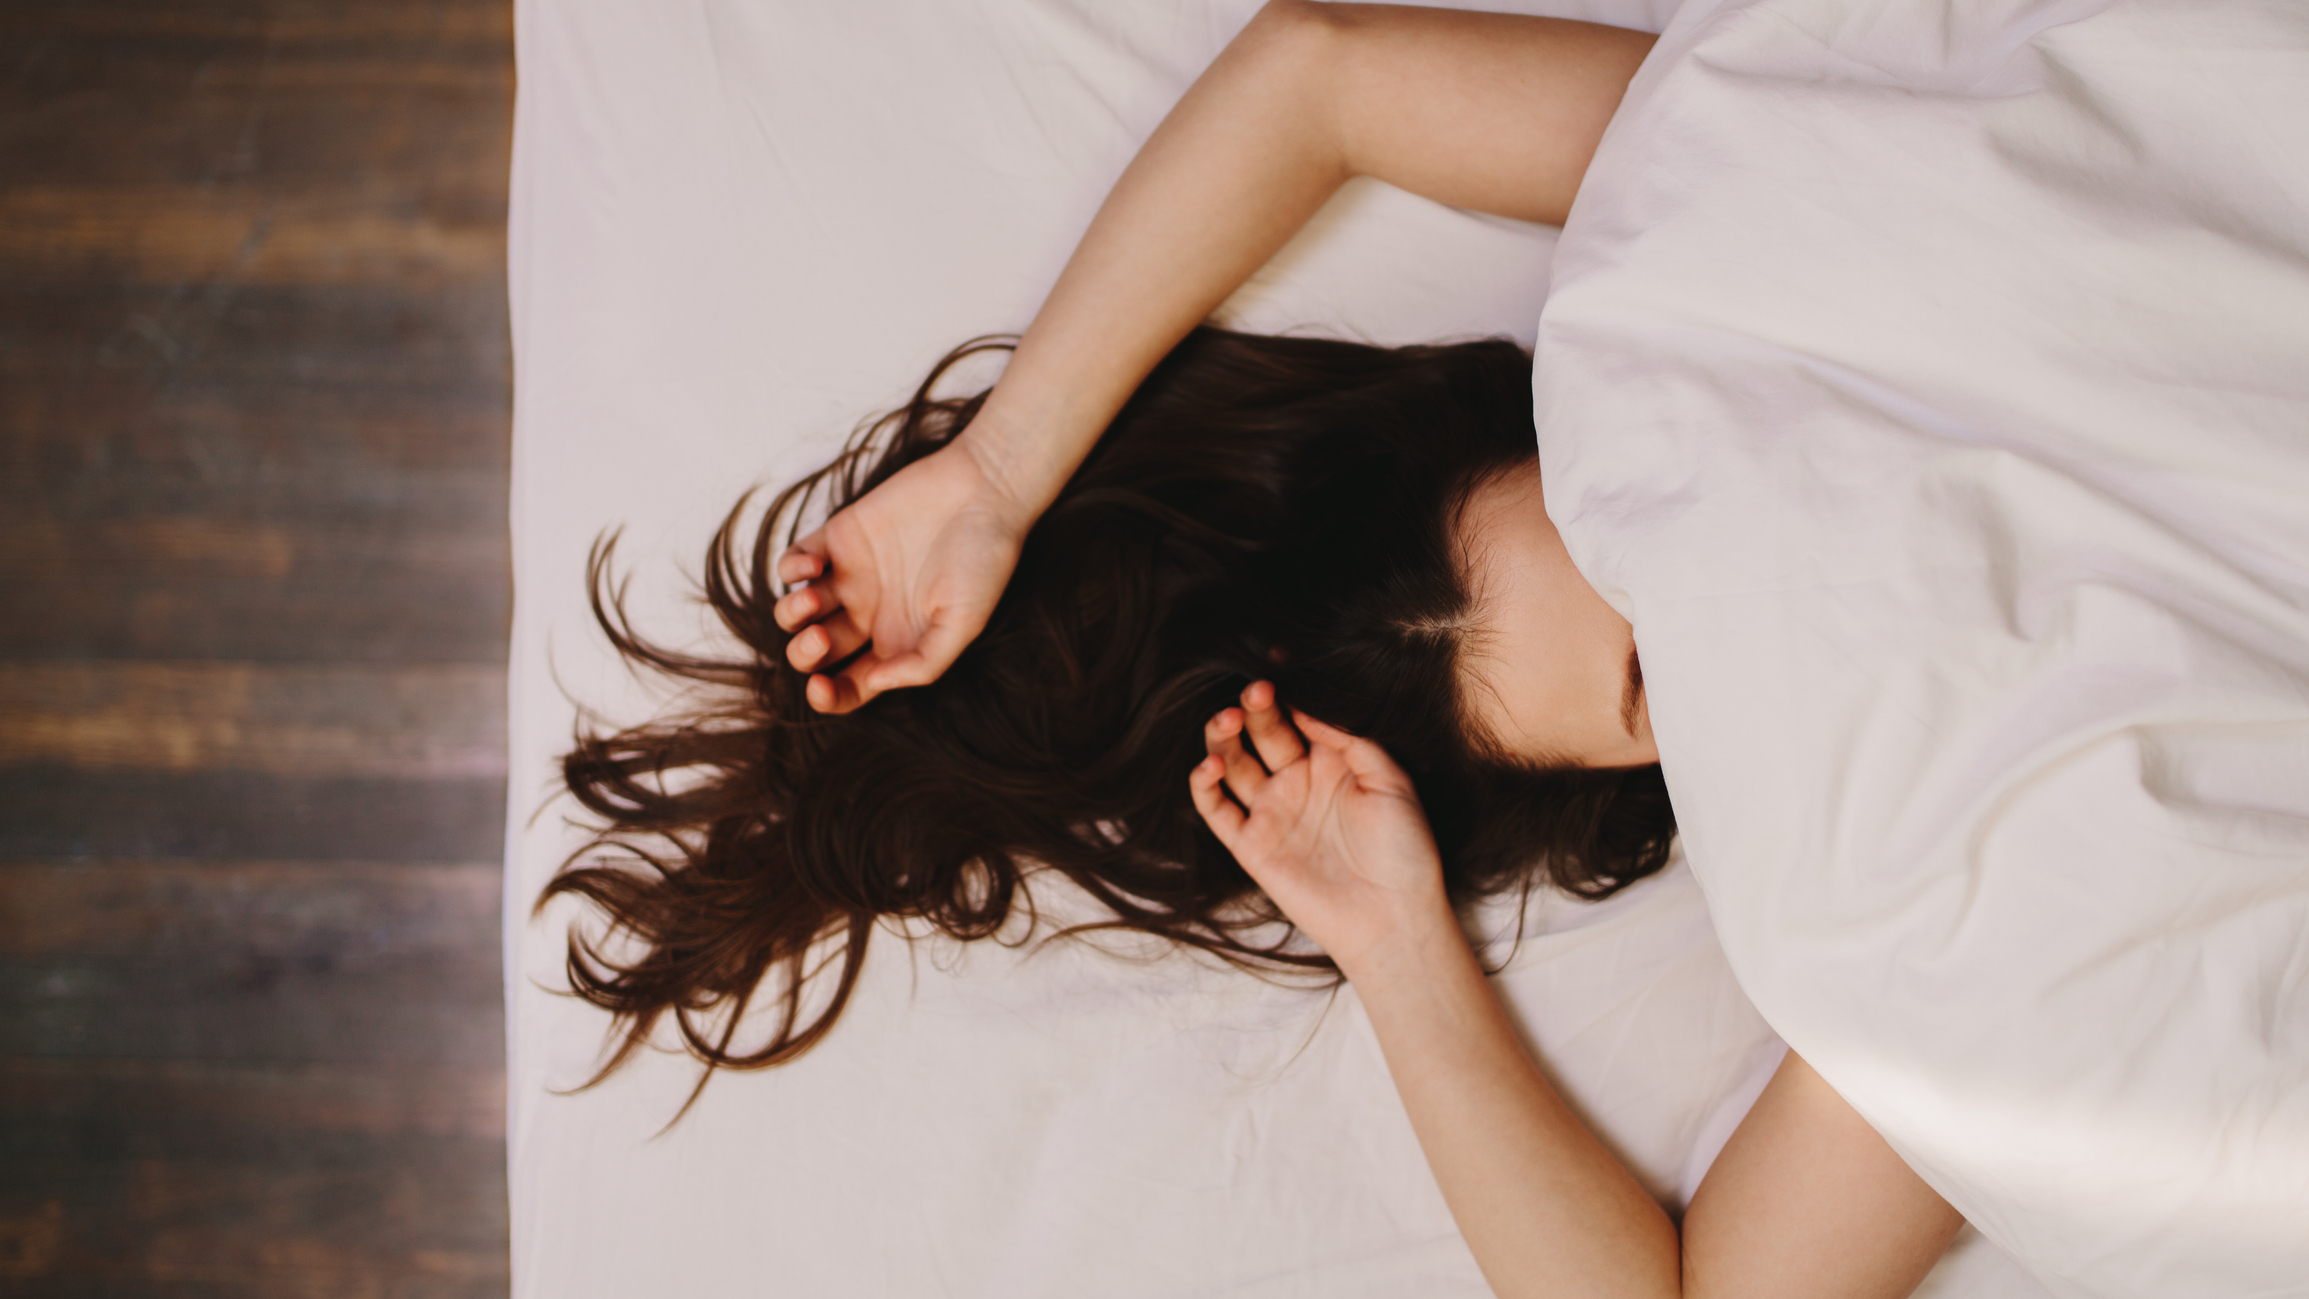 Top view of a woman sleeping on bed covering her face. Close up of a woman in deep sleep with her hand beside her head and hair let loose.